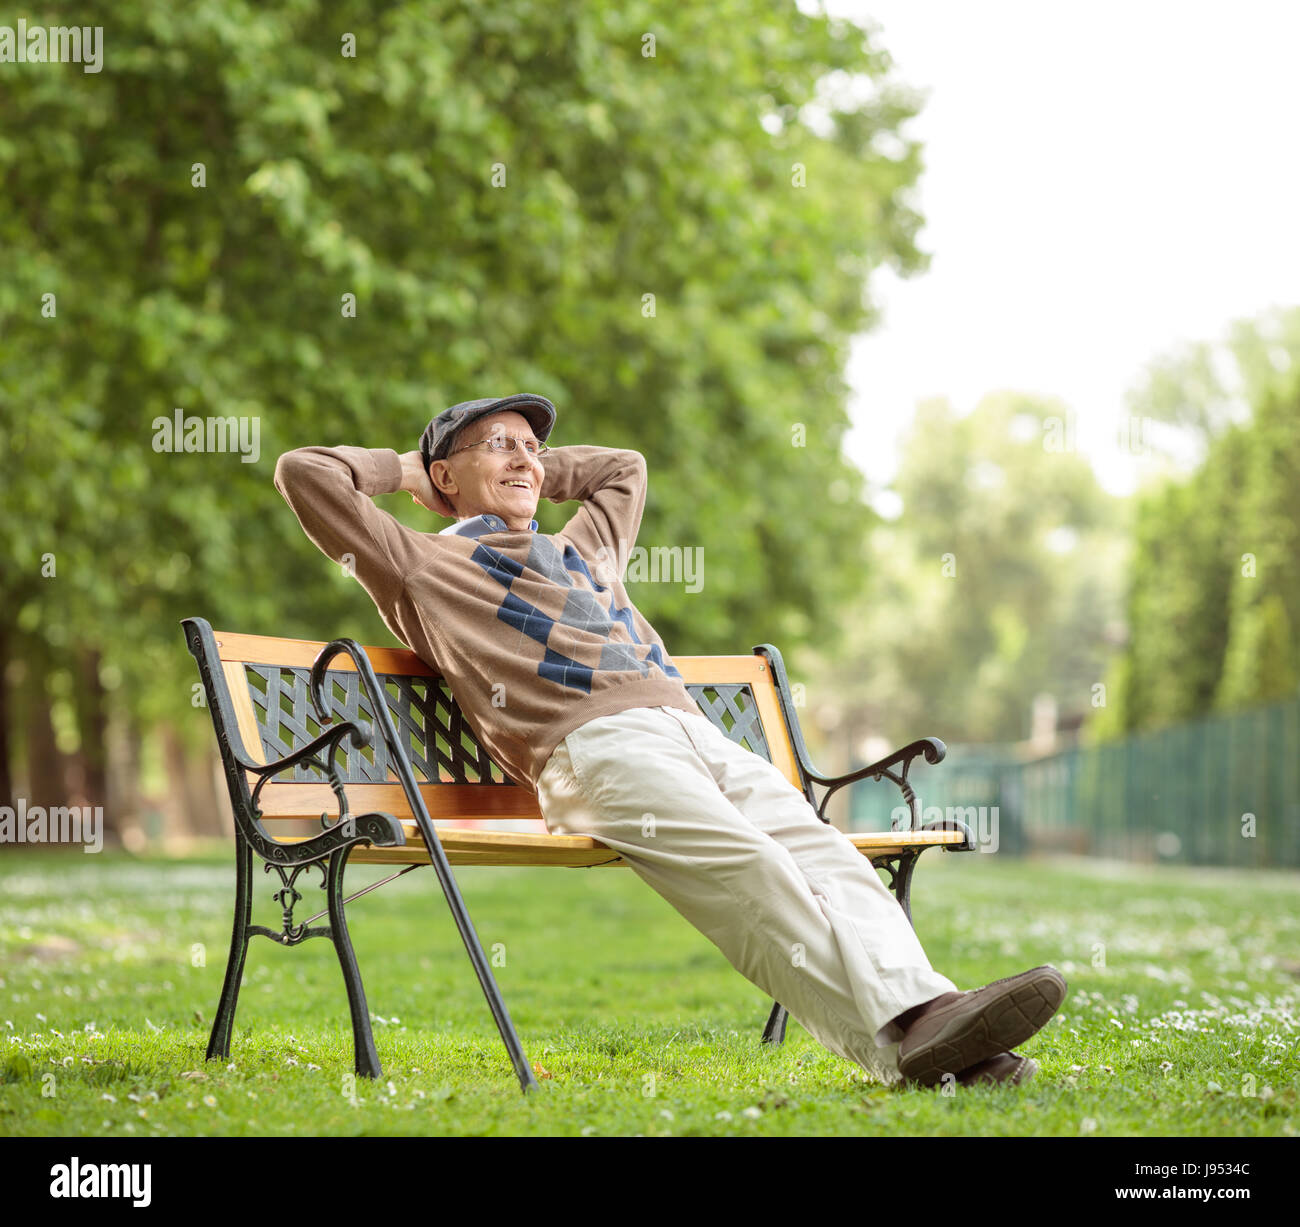 Senior relaxing on a wooden bench in the park Stock Photo